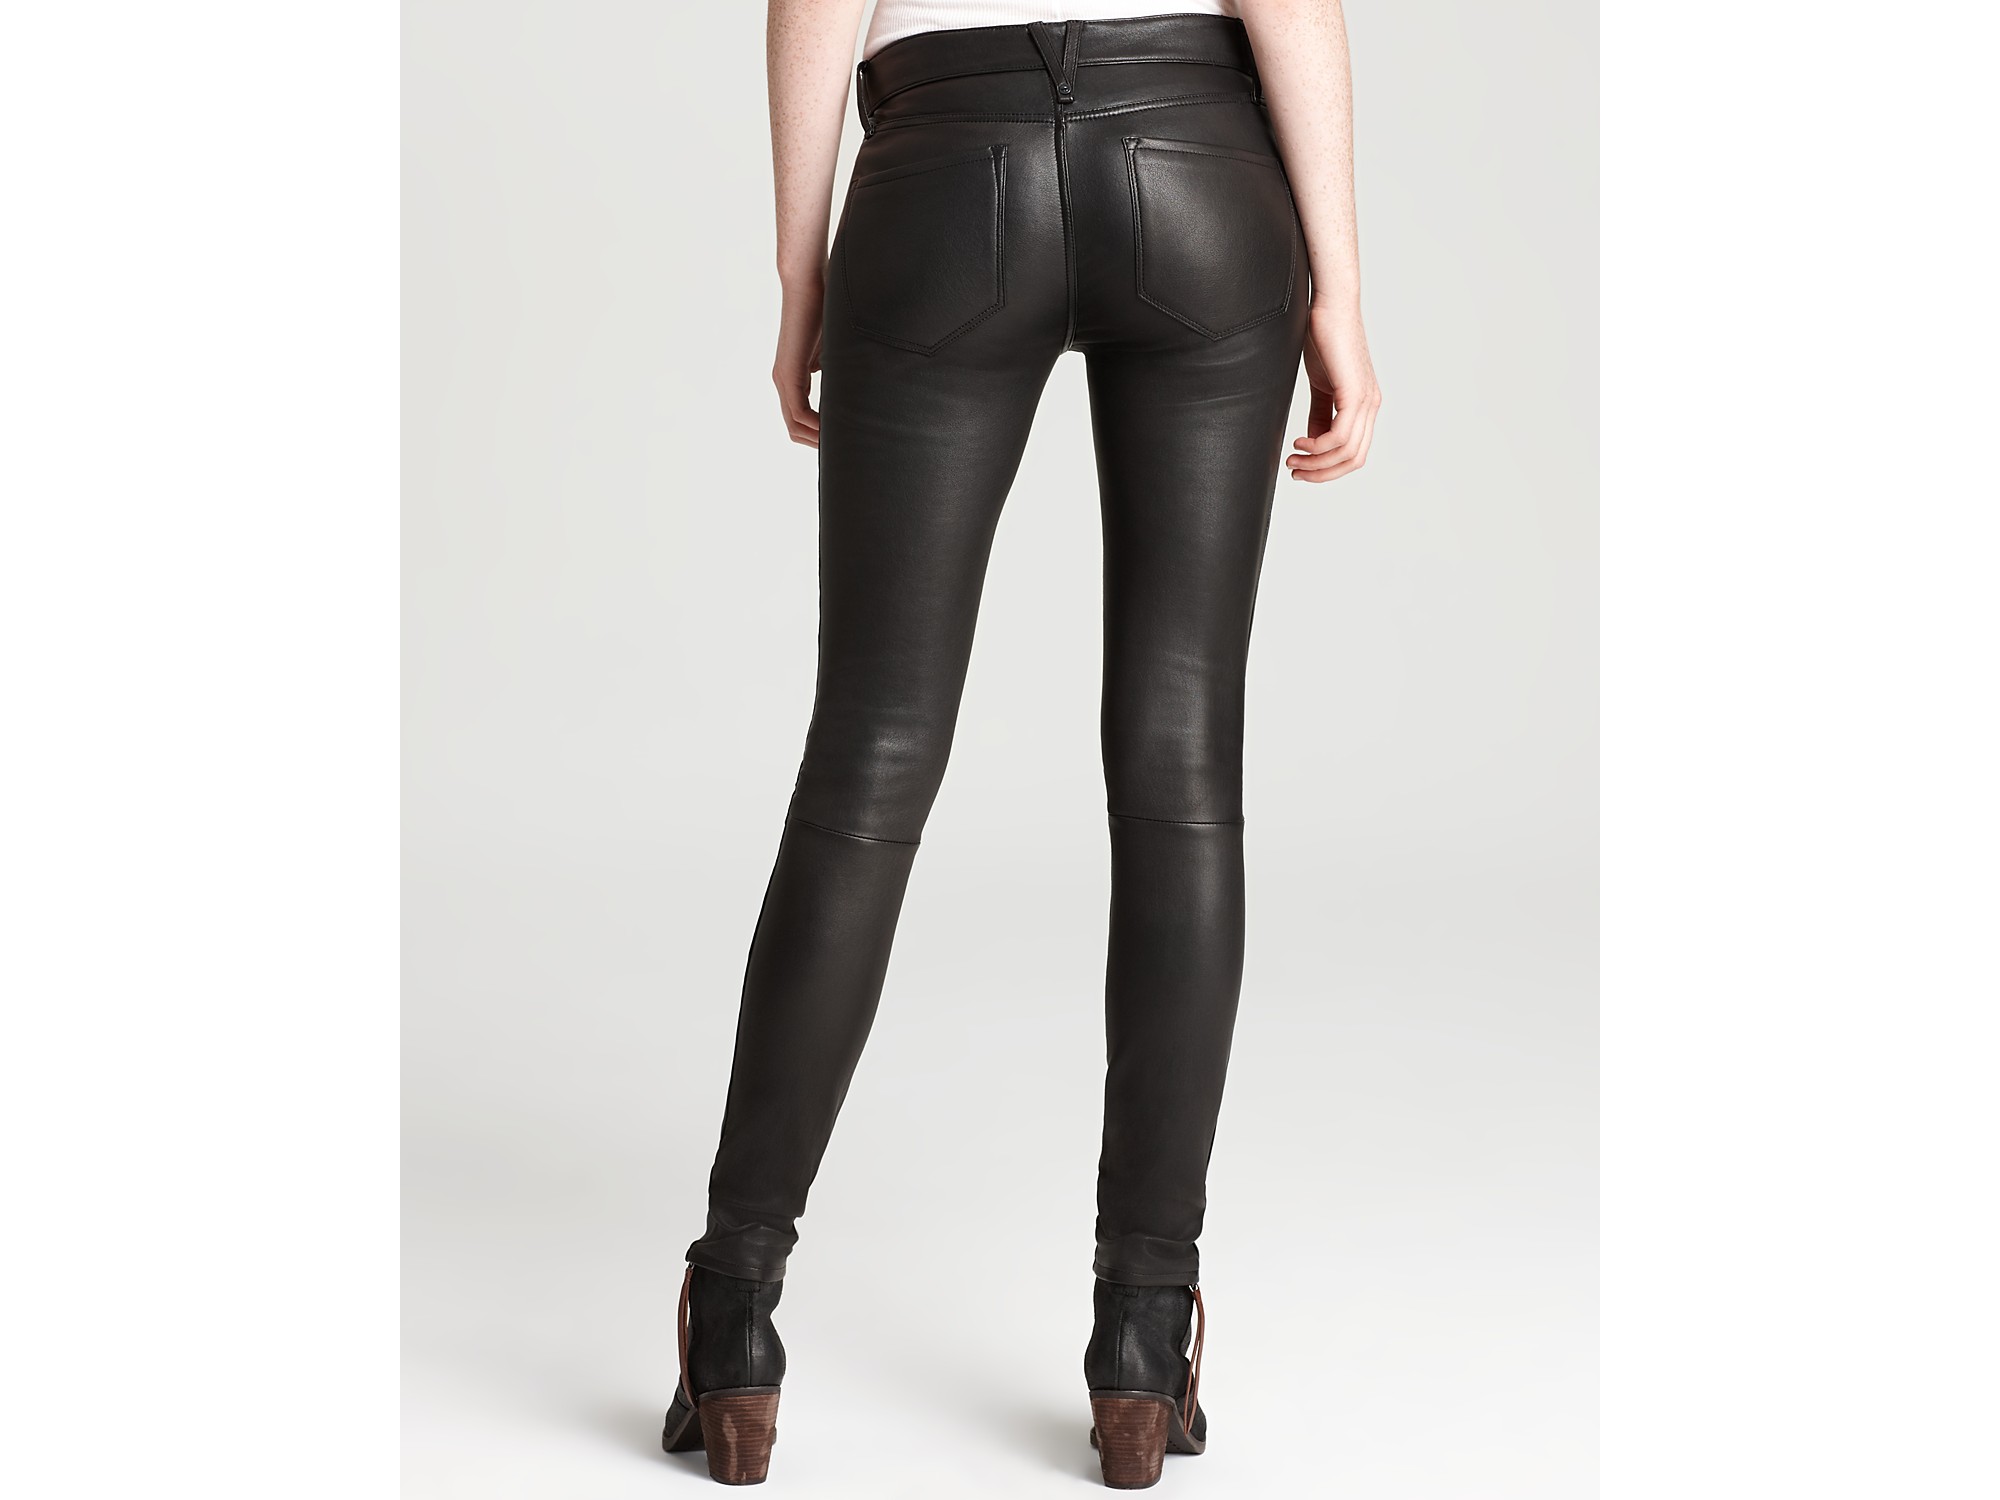 Marc By Marc Jacobs Leather Leggings in Black - Lyst